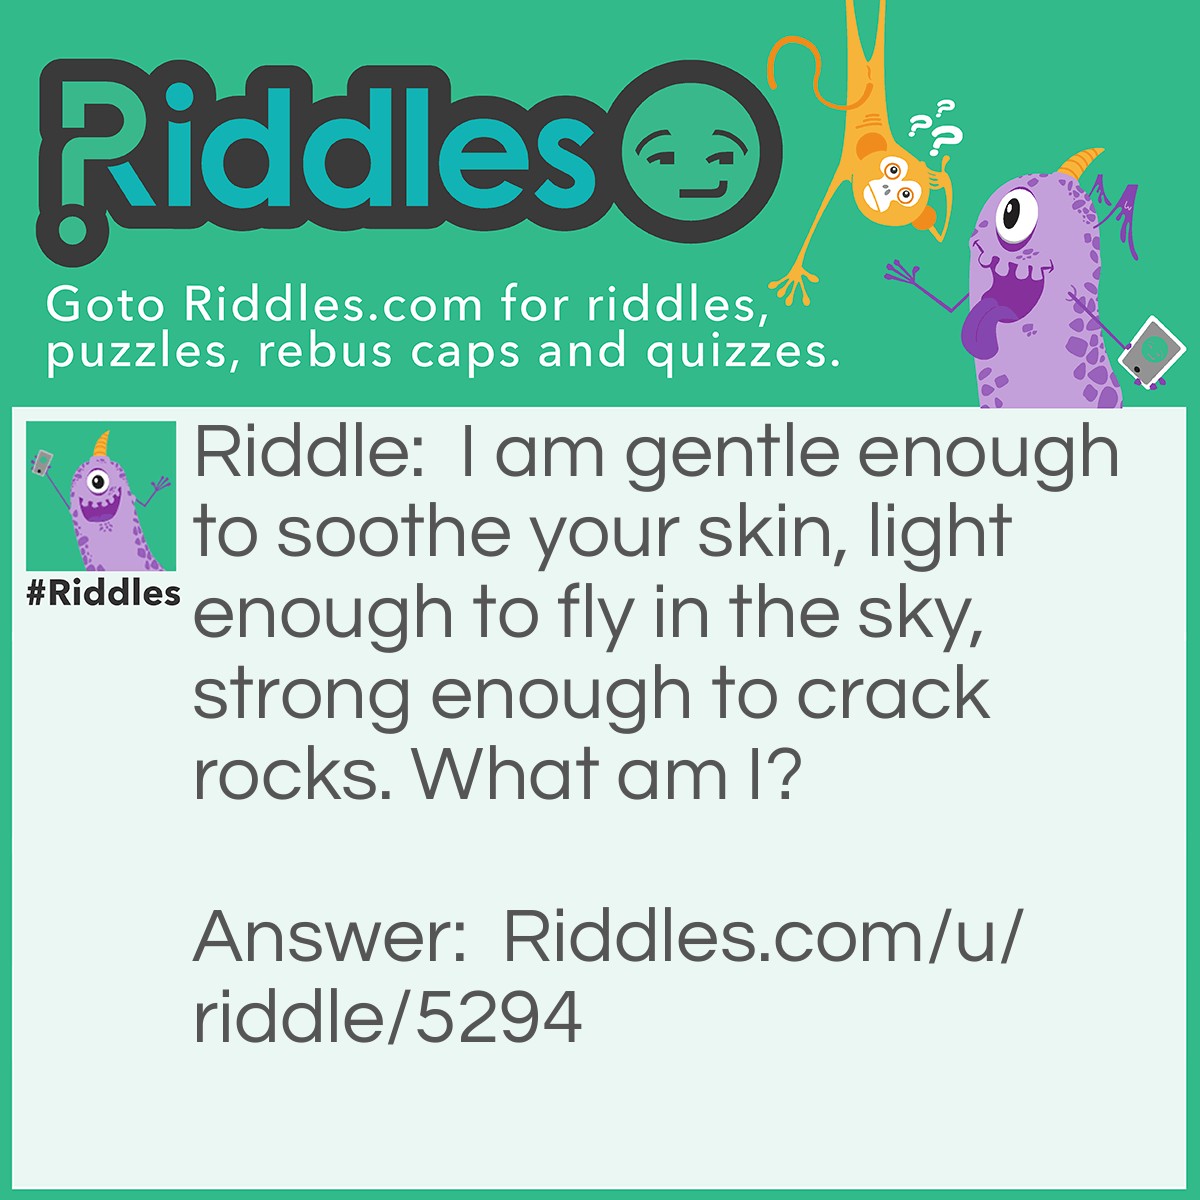 Riddle: I am gentle enough to soothe your skin, light enough to fly in the sky, strong enough to crack rocks. What am I? Answer: I'm Water.